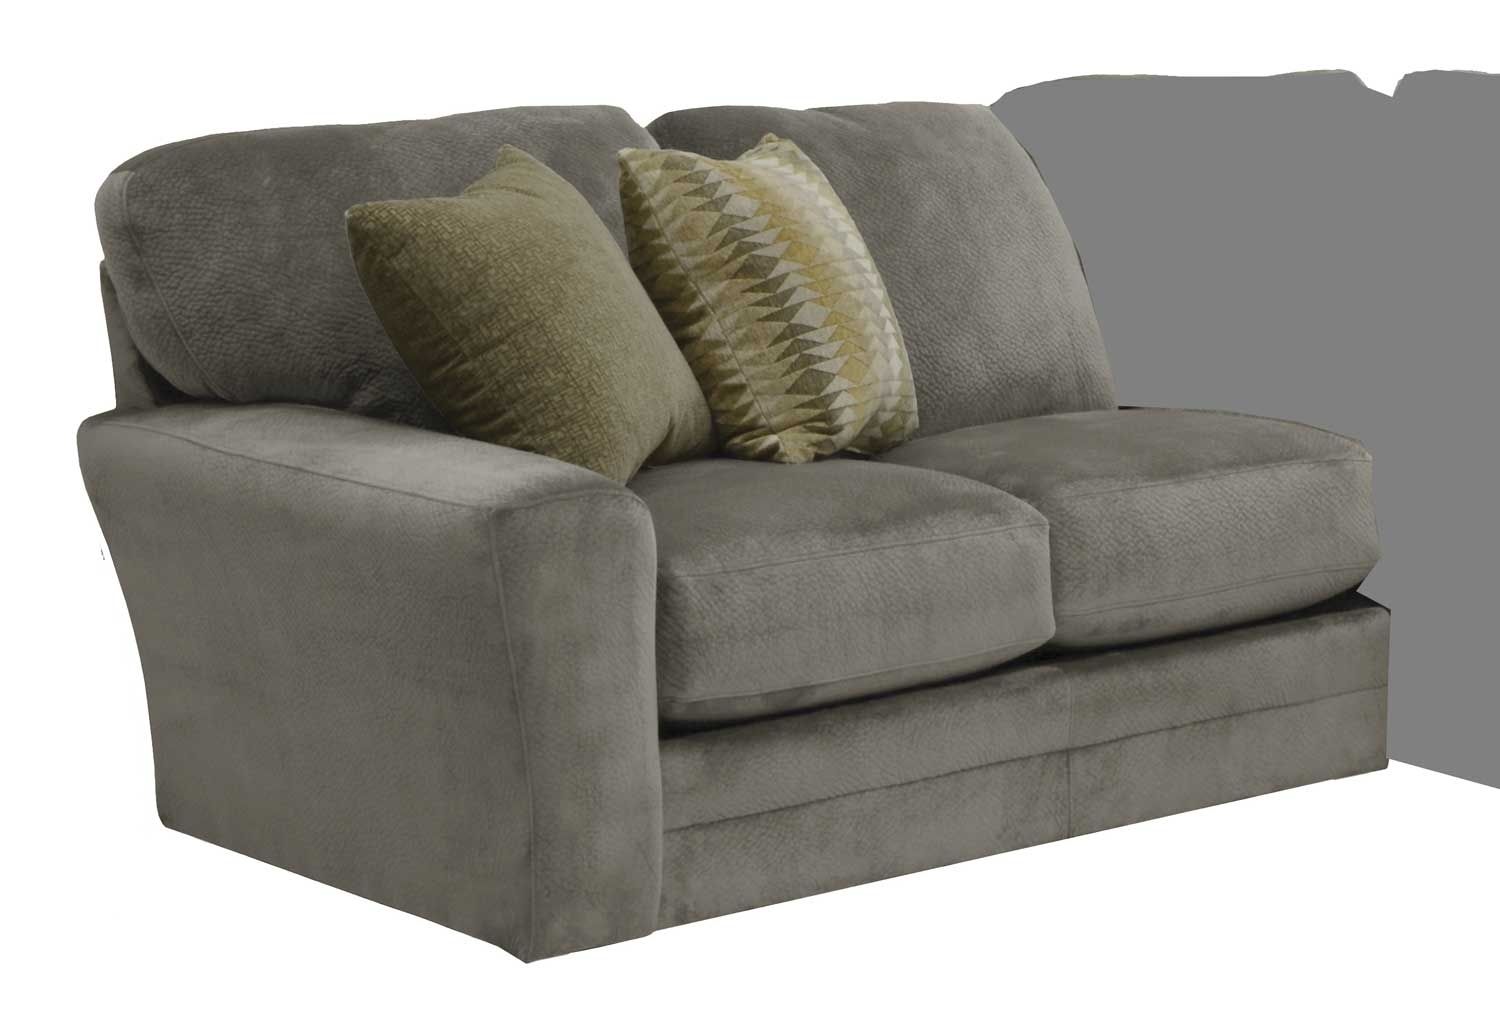 Removable Cover Sofa – Home And Textiles In Sofas With Removable Cover (View 6 of 10)